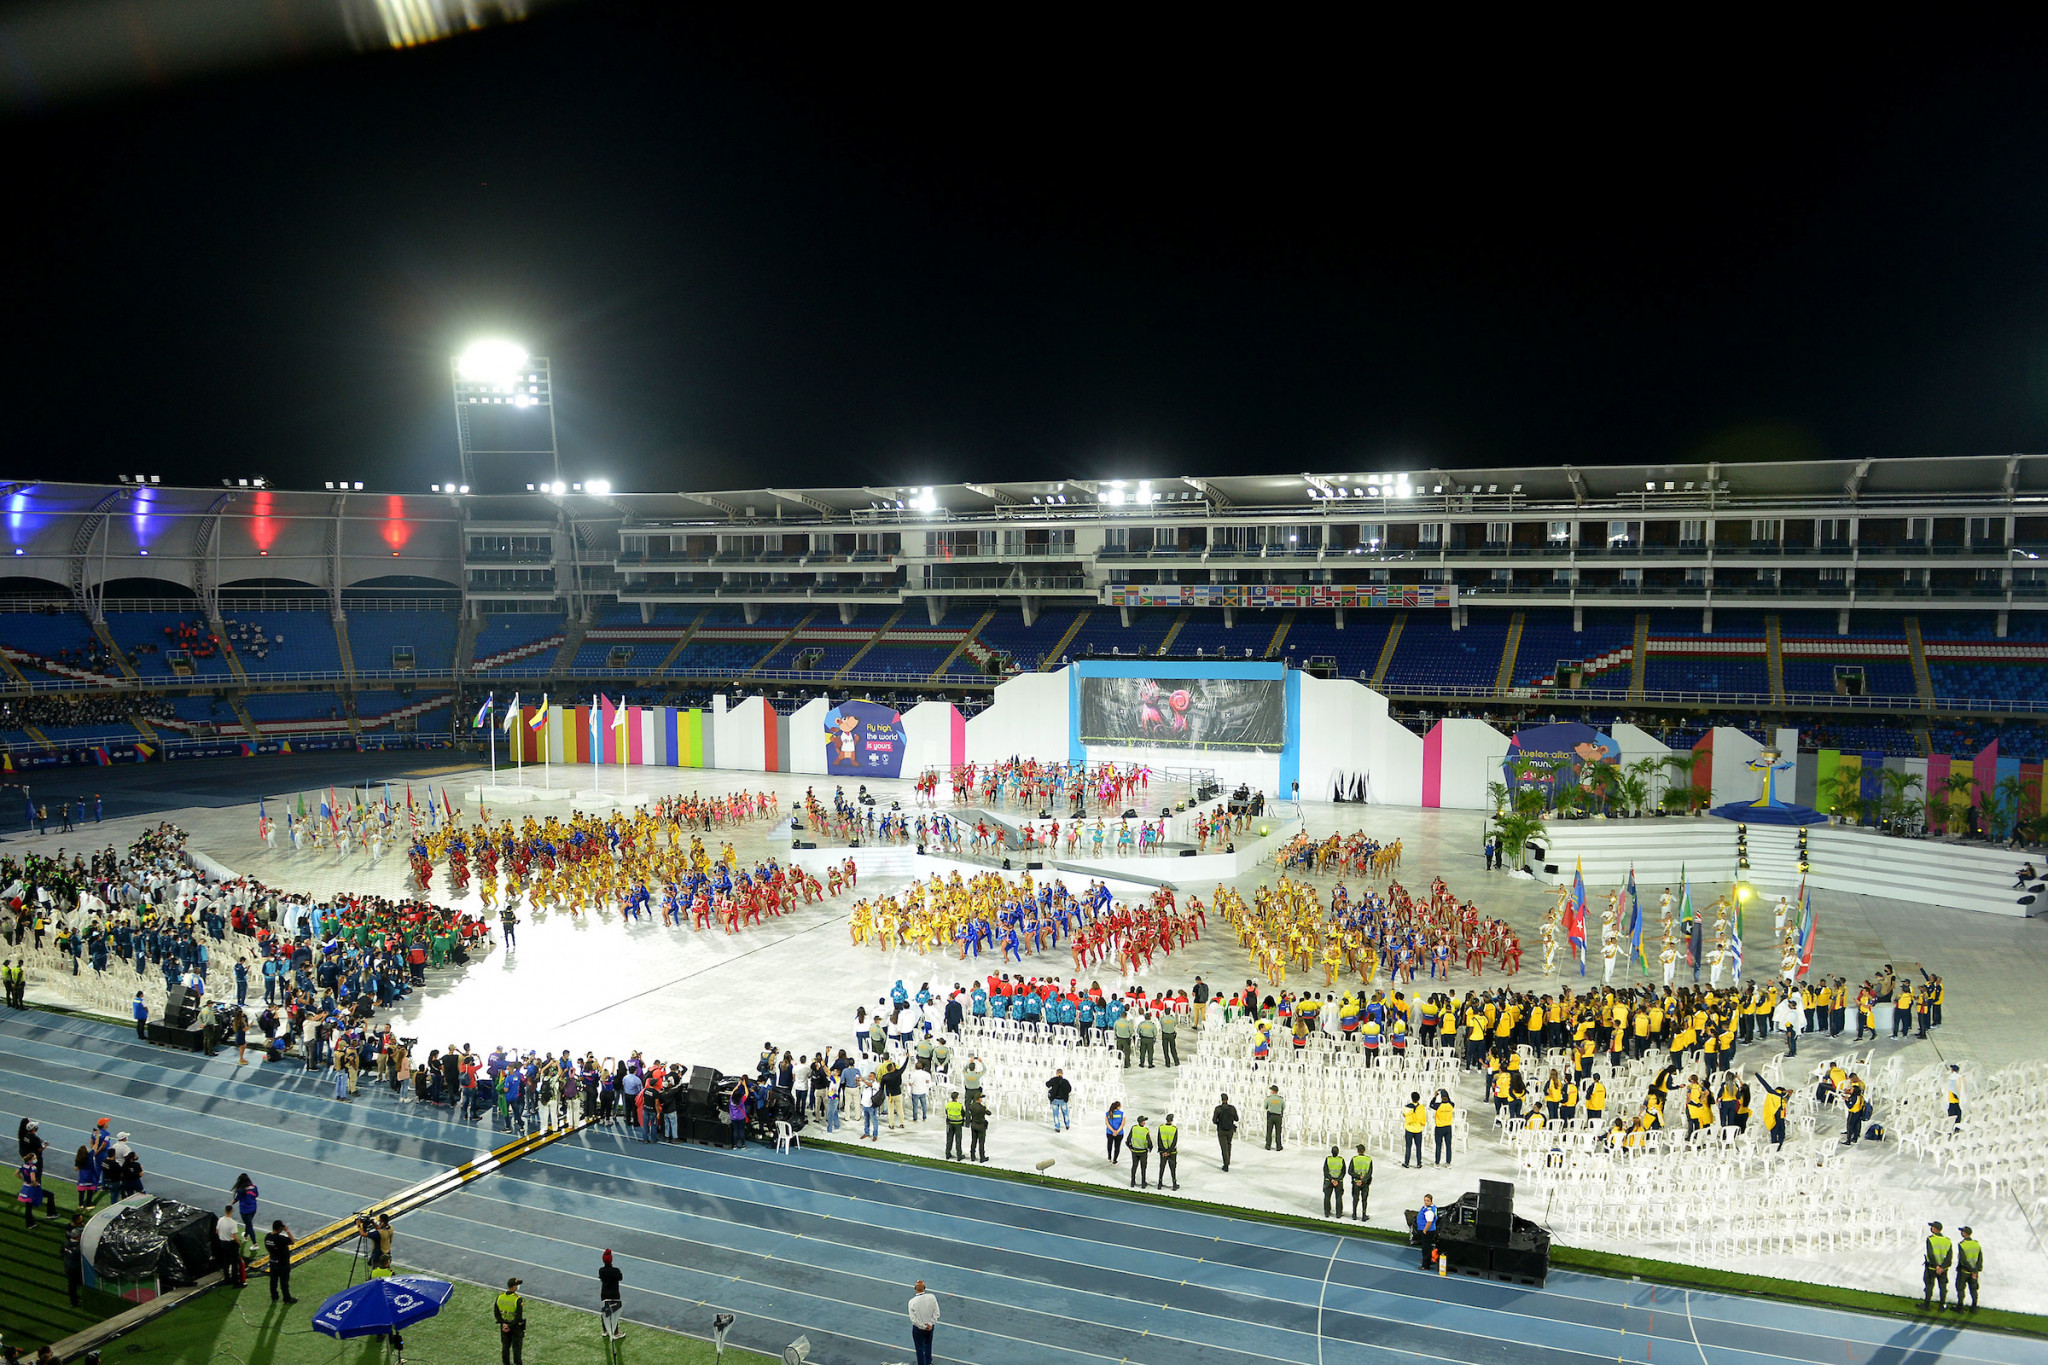 The inaugural Junior Pan American Games Opening Ceremony took place in Cali's Pascual Guerrero Olympic Stadium in Colombia ©Agencia.XpressMedia